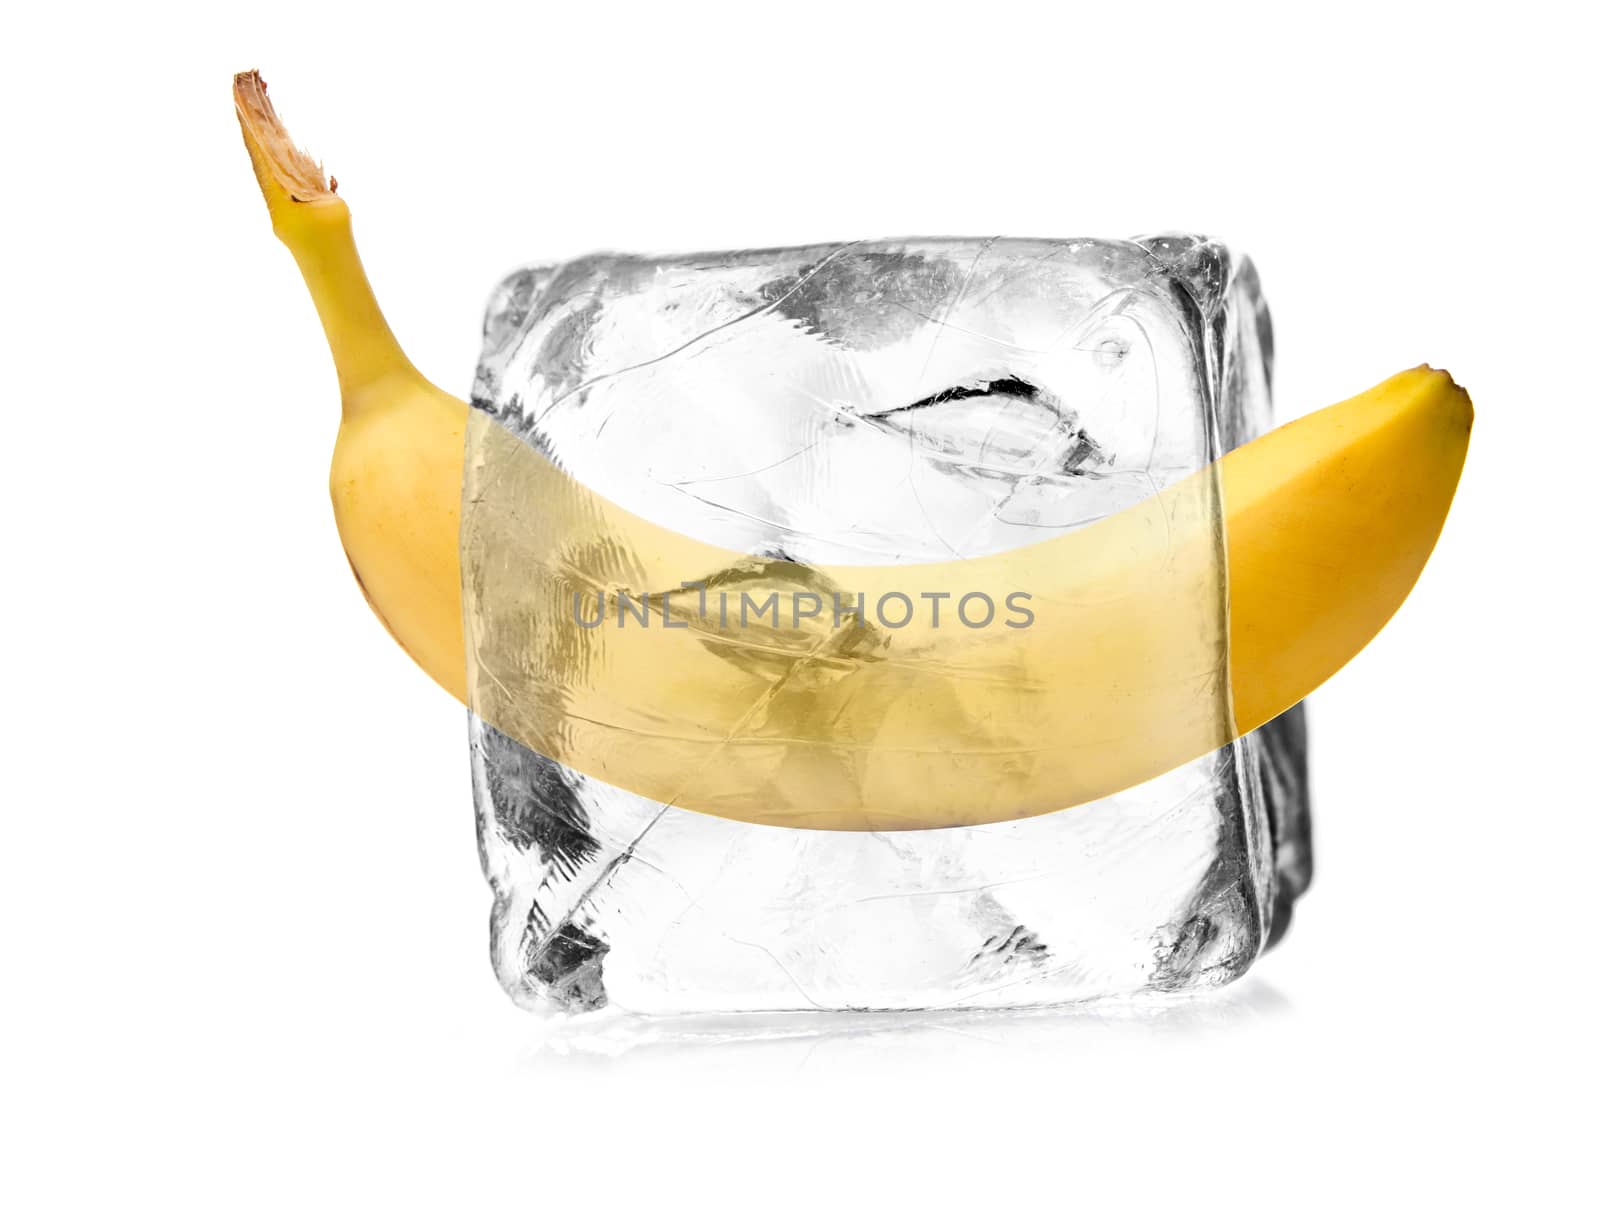 banana in ice cube by Tomjac1980